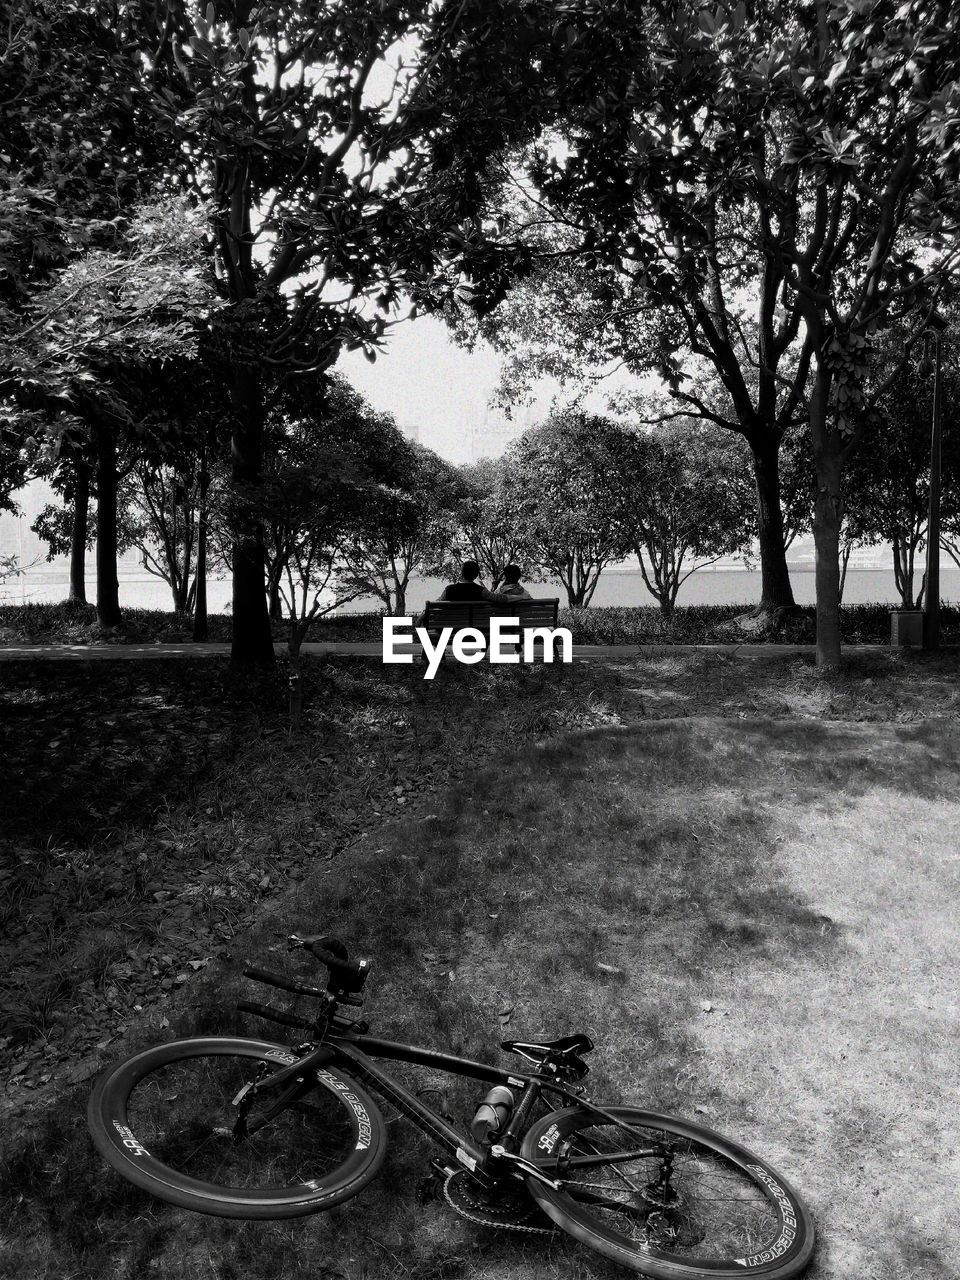 BICYCLE PARKED IN PARK